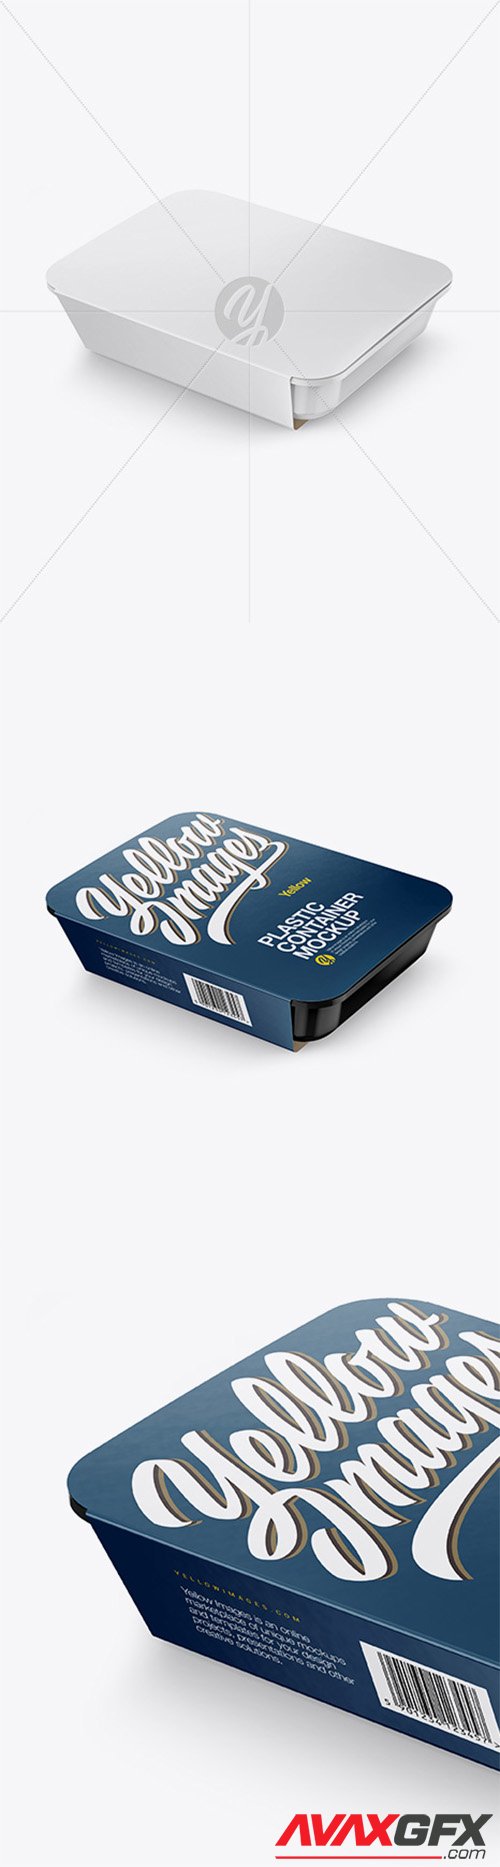 Plastic Container w/ Paper Label Mockup - Half Side View (High-Angle Shot) 25582 TIF